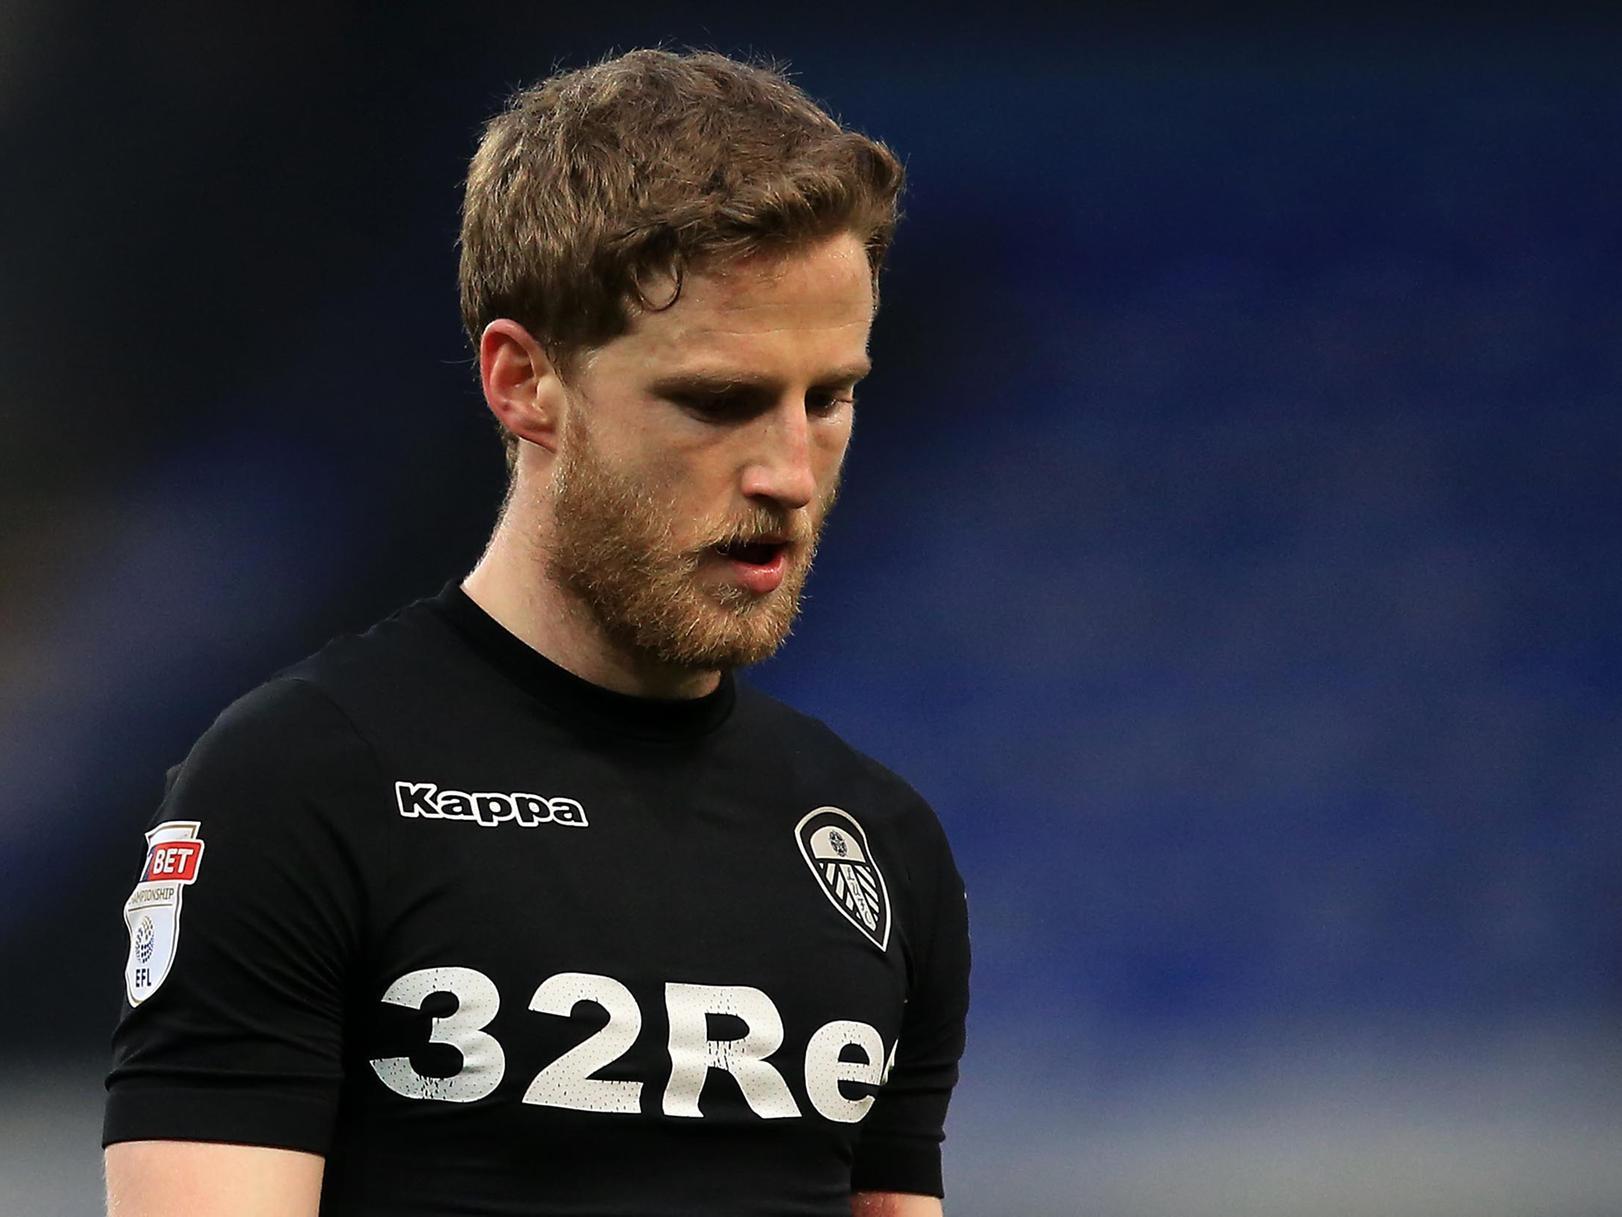 Leeds United chiefs see no future for Eunan OKane at Elland Road following the Republic of Ireland midfielders loan move to Luton Town. (Football Insider)